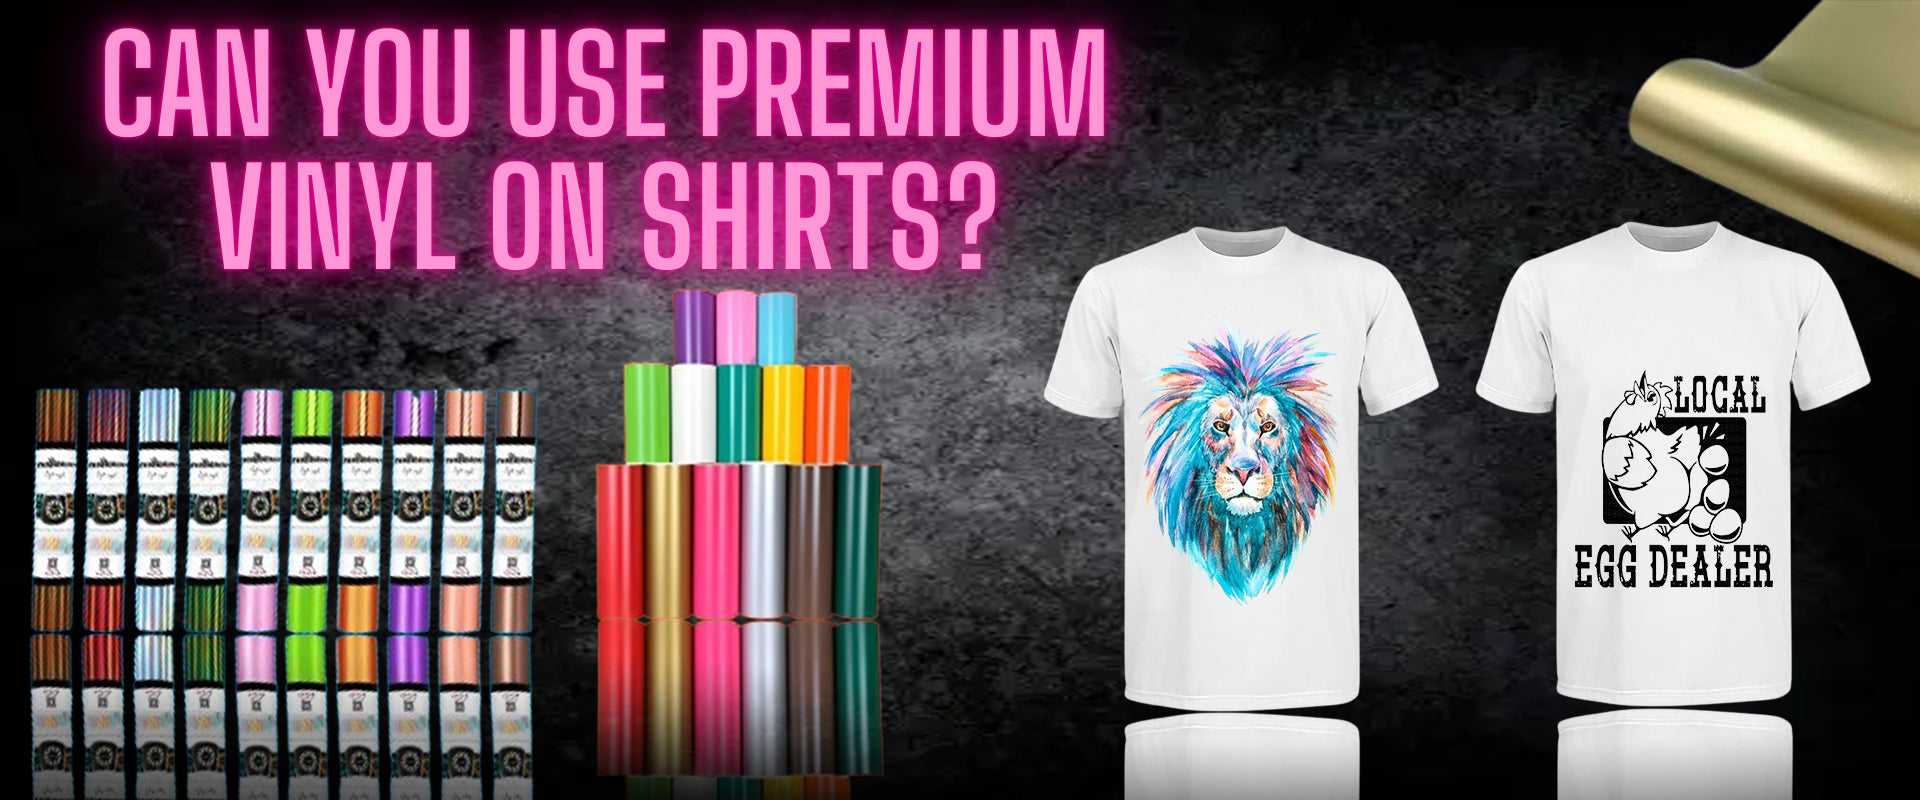 Can-You-Use-Premium-Vinyl-On-Shirts.webp__PID:65dc59a4-faa1-4e38-bf6e-d75df1864f1b